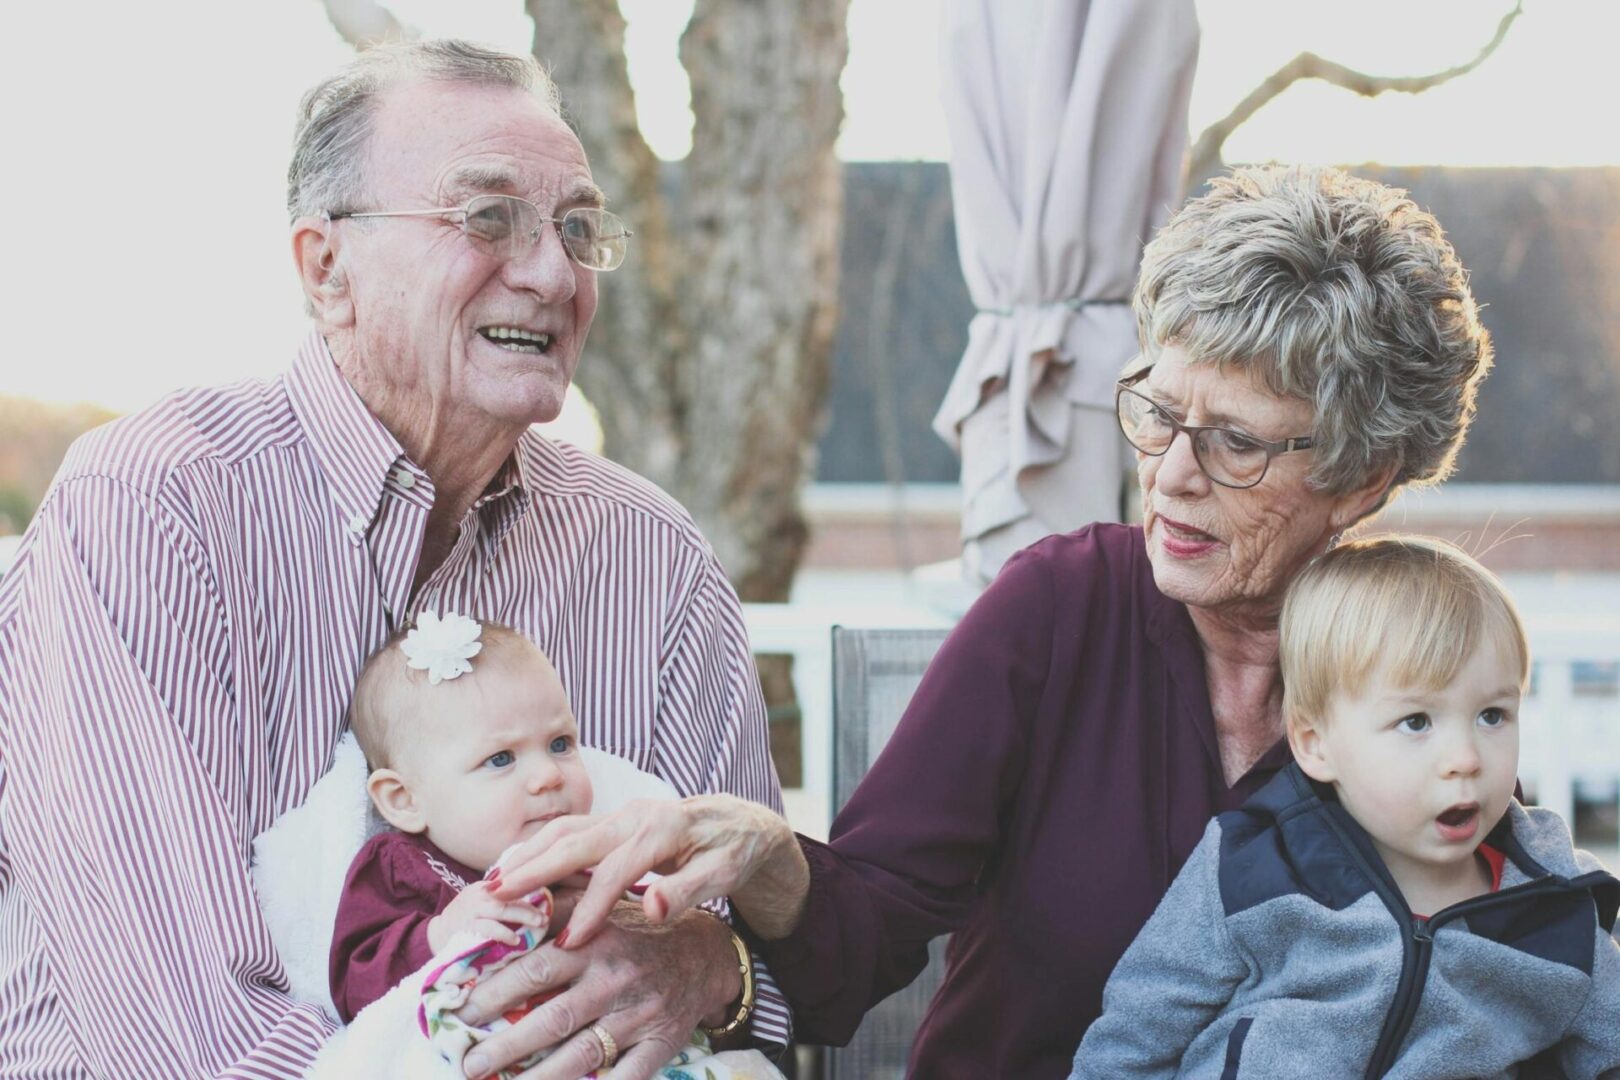 An older couple holding a baby and talking to another elderly man.